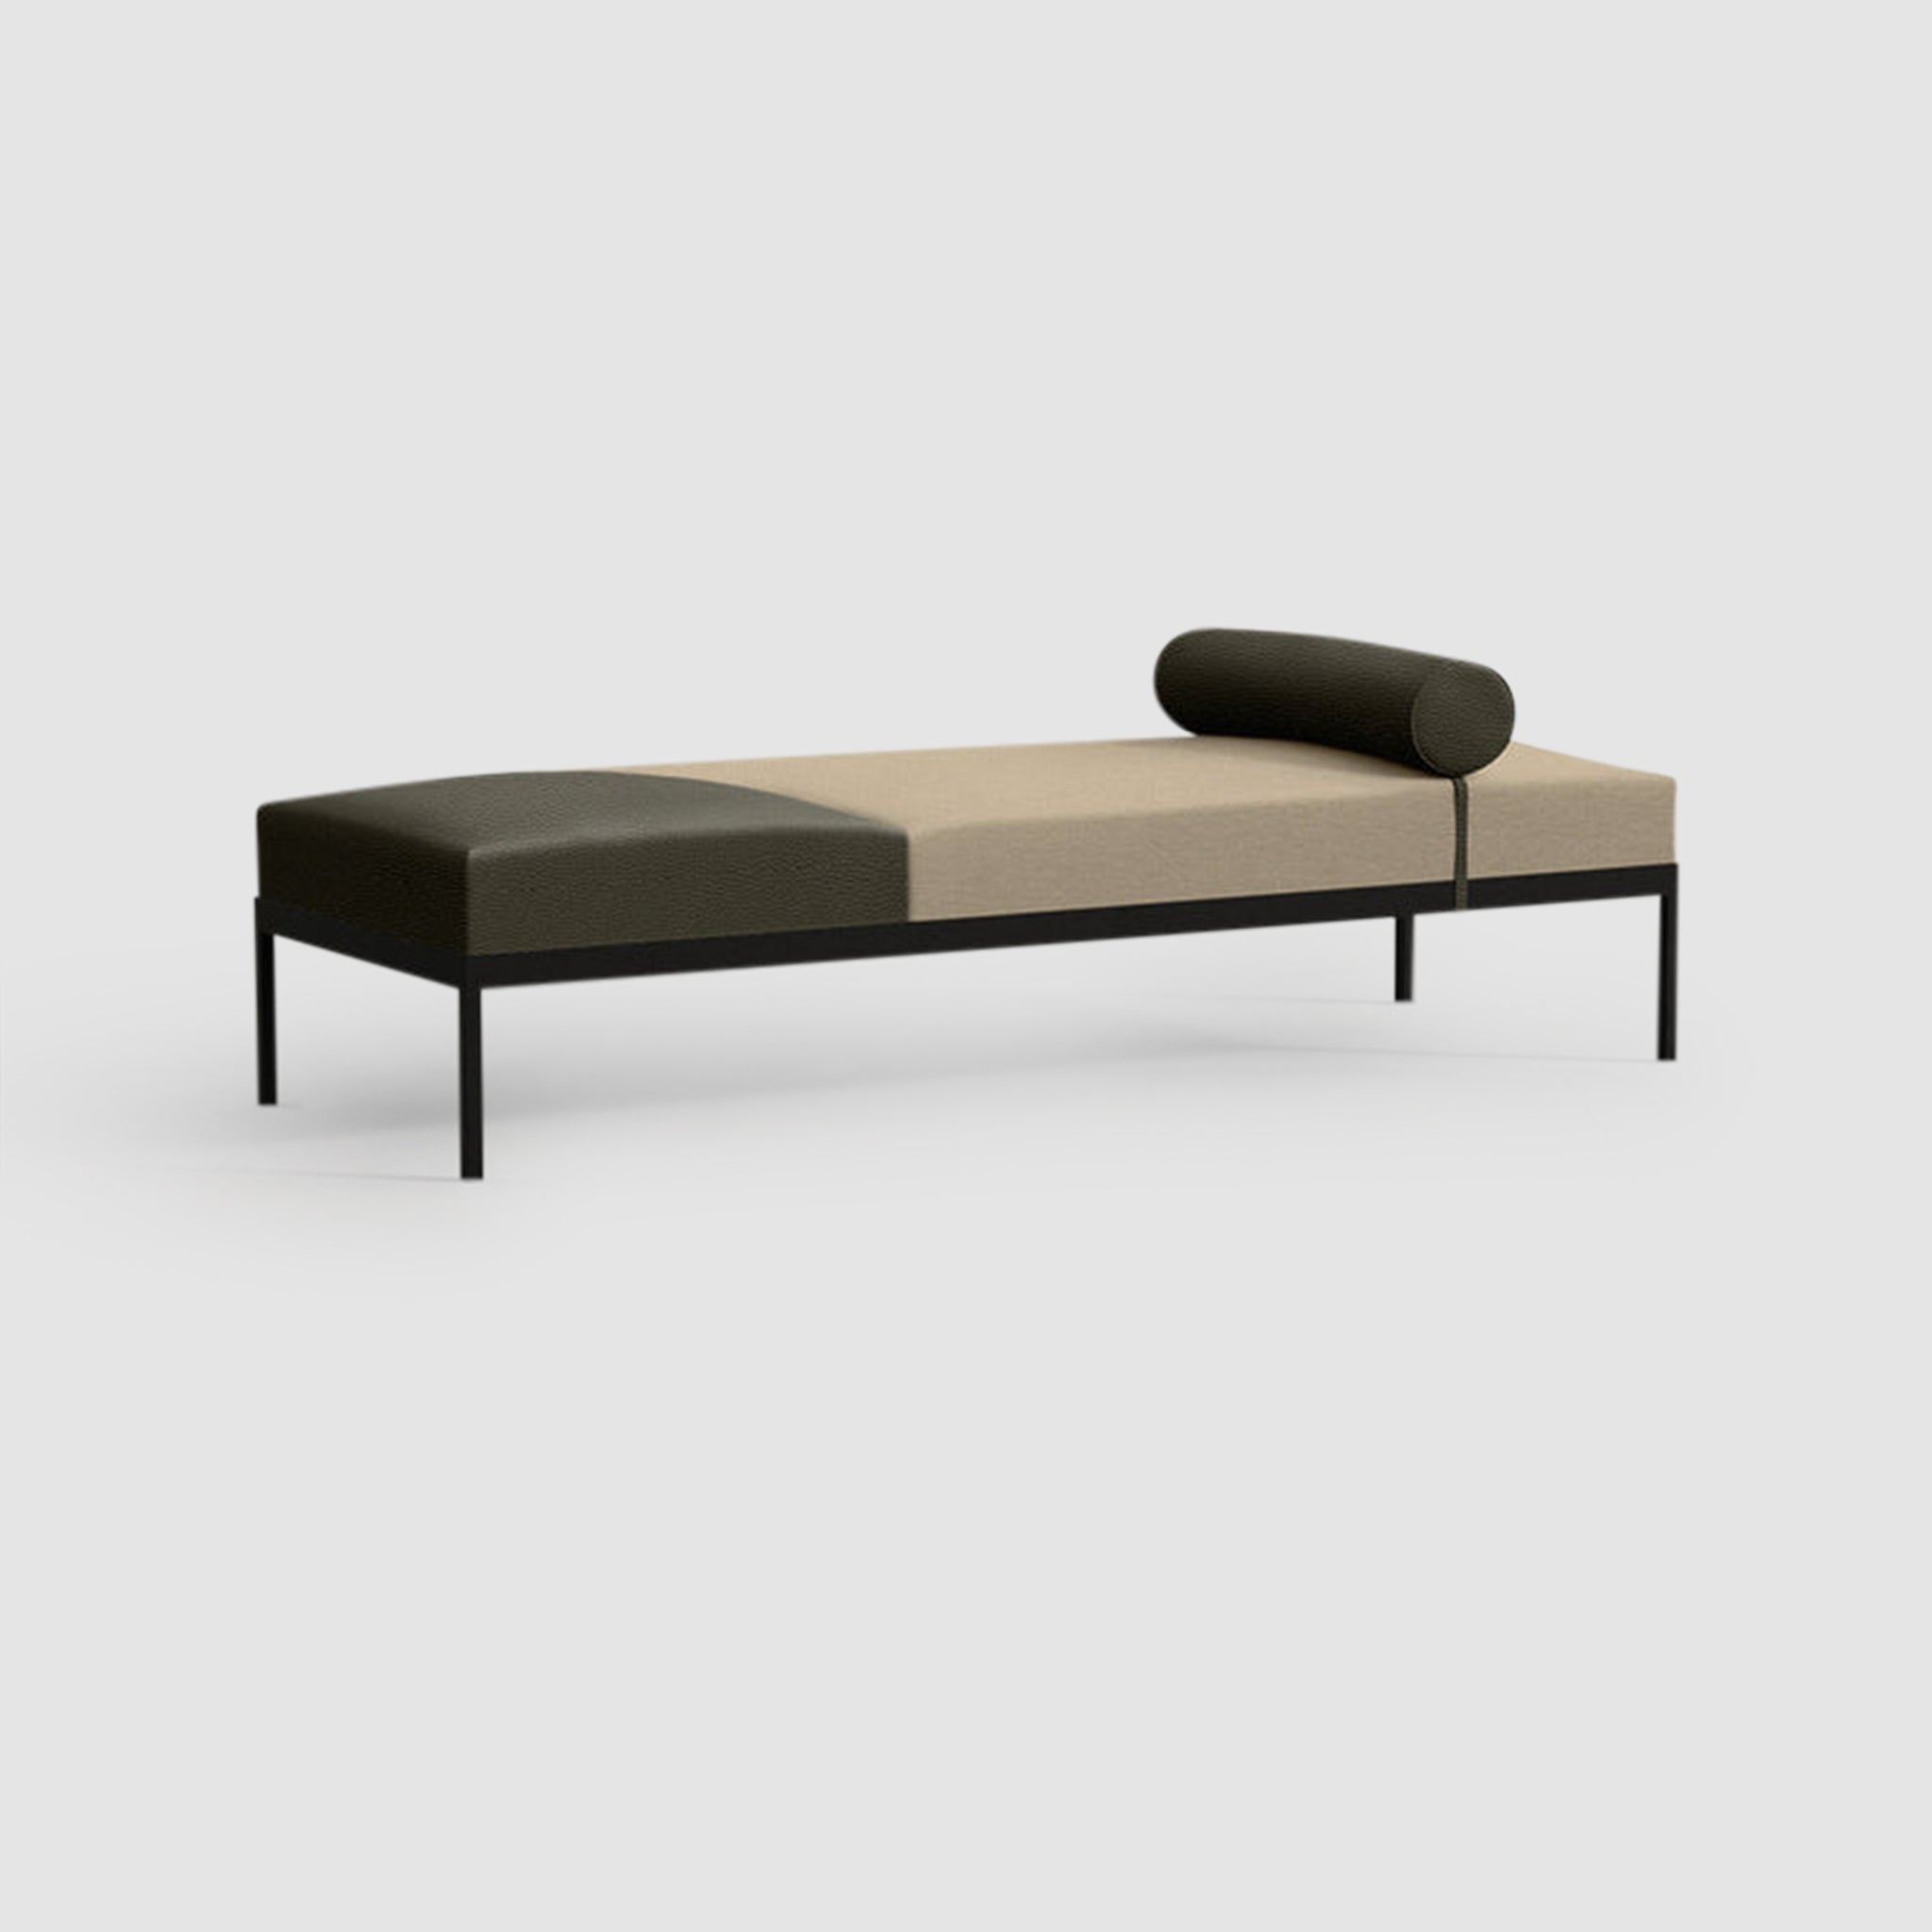 The Rodman Day Bed showcasing powder-coated steel frame.